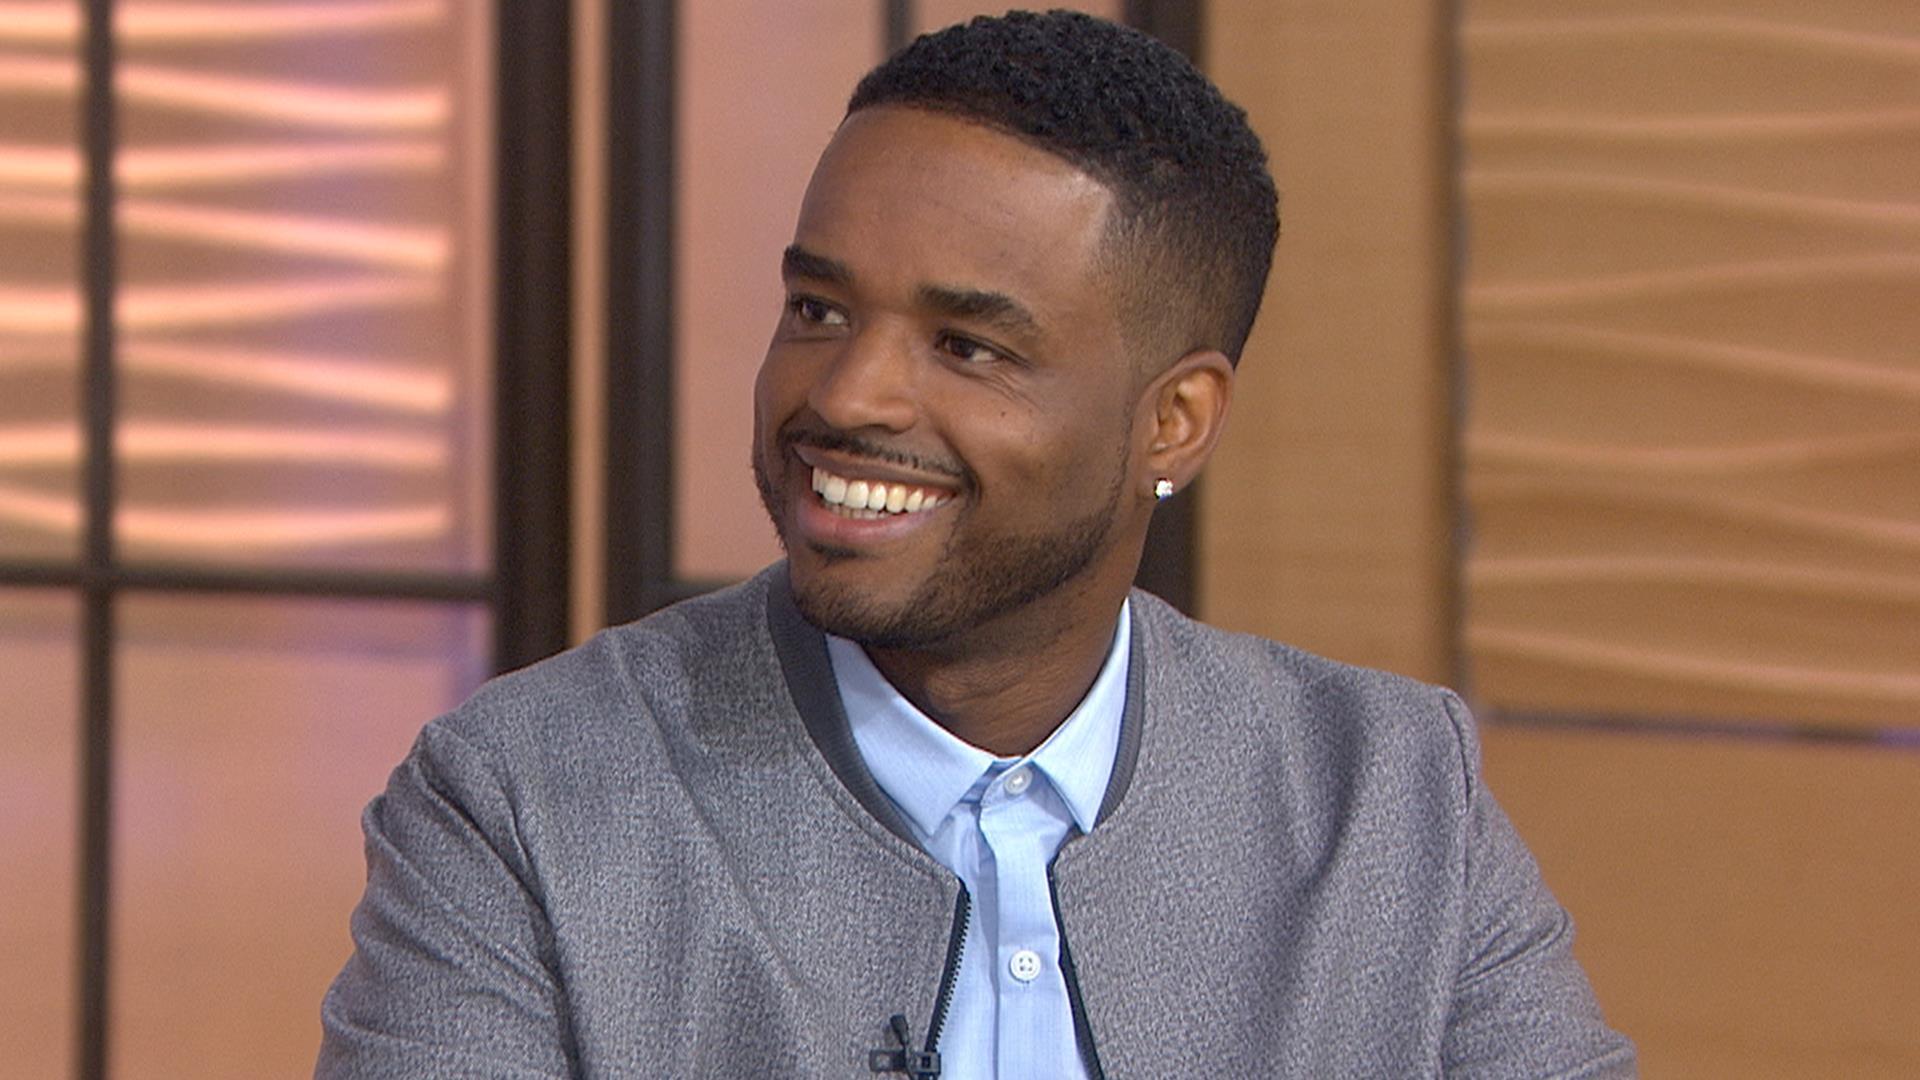 Larenz Tate: If the planets aligned, I would do a sequel to 'Love